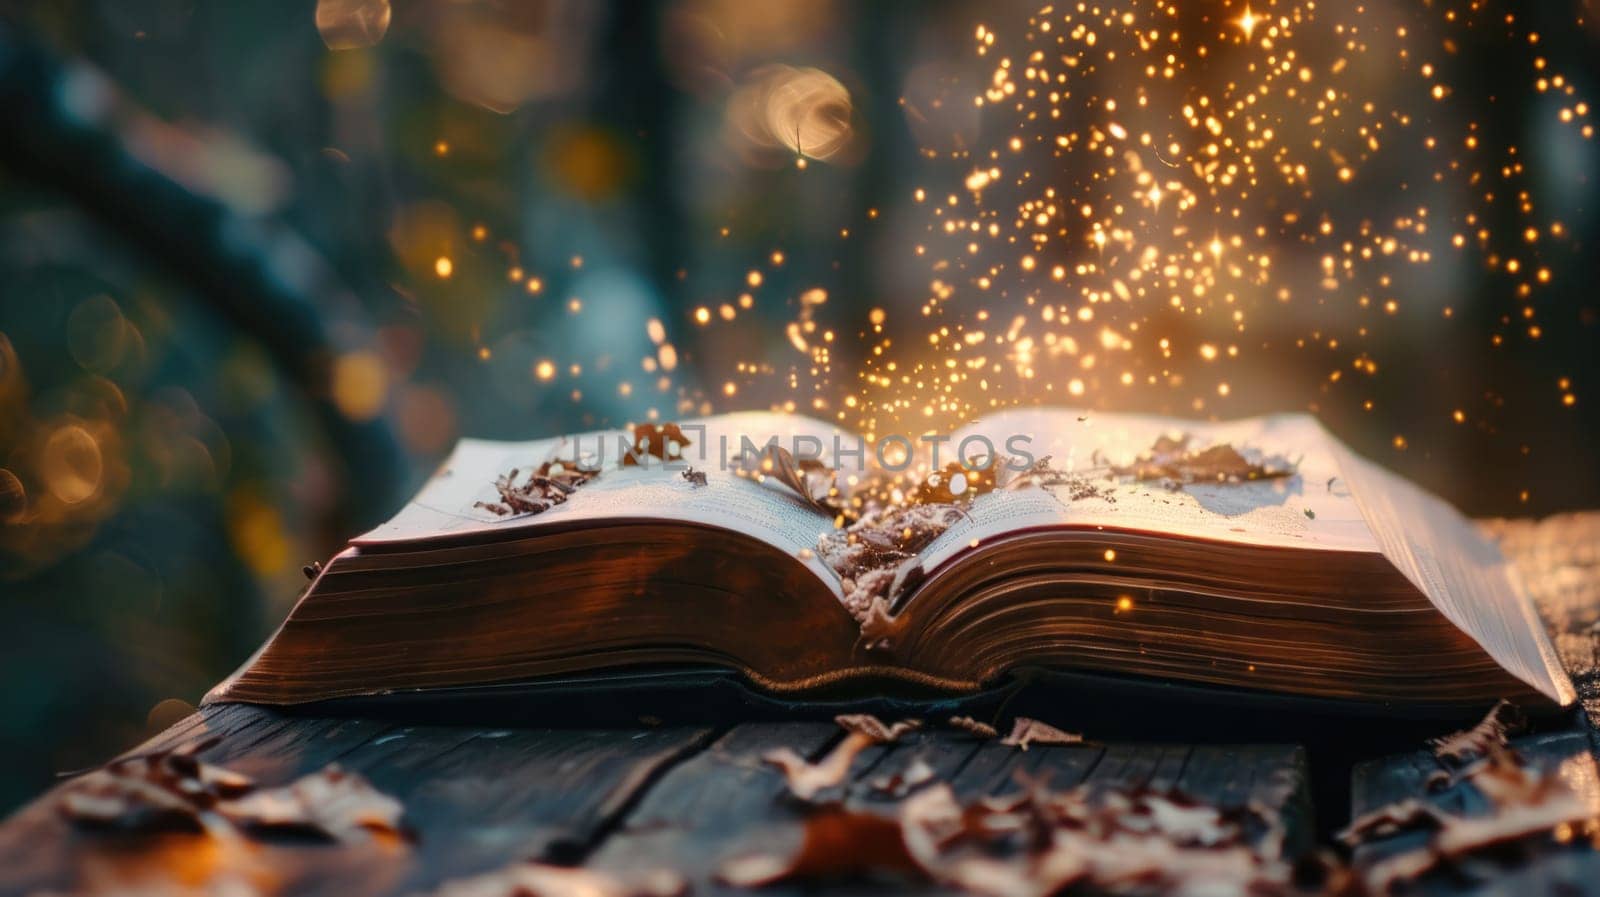 The magical book that turning the multiple glowing glittered page that stay on the wood table that surrounded with the mystery fantasy glowing glittered mist that looks like from dream world. AIGX03.